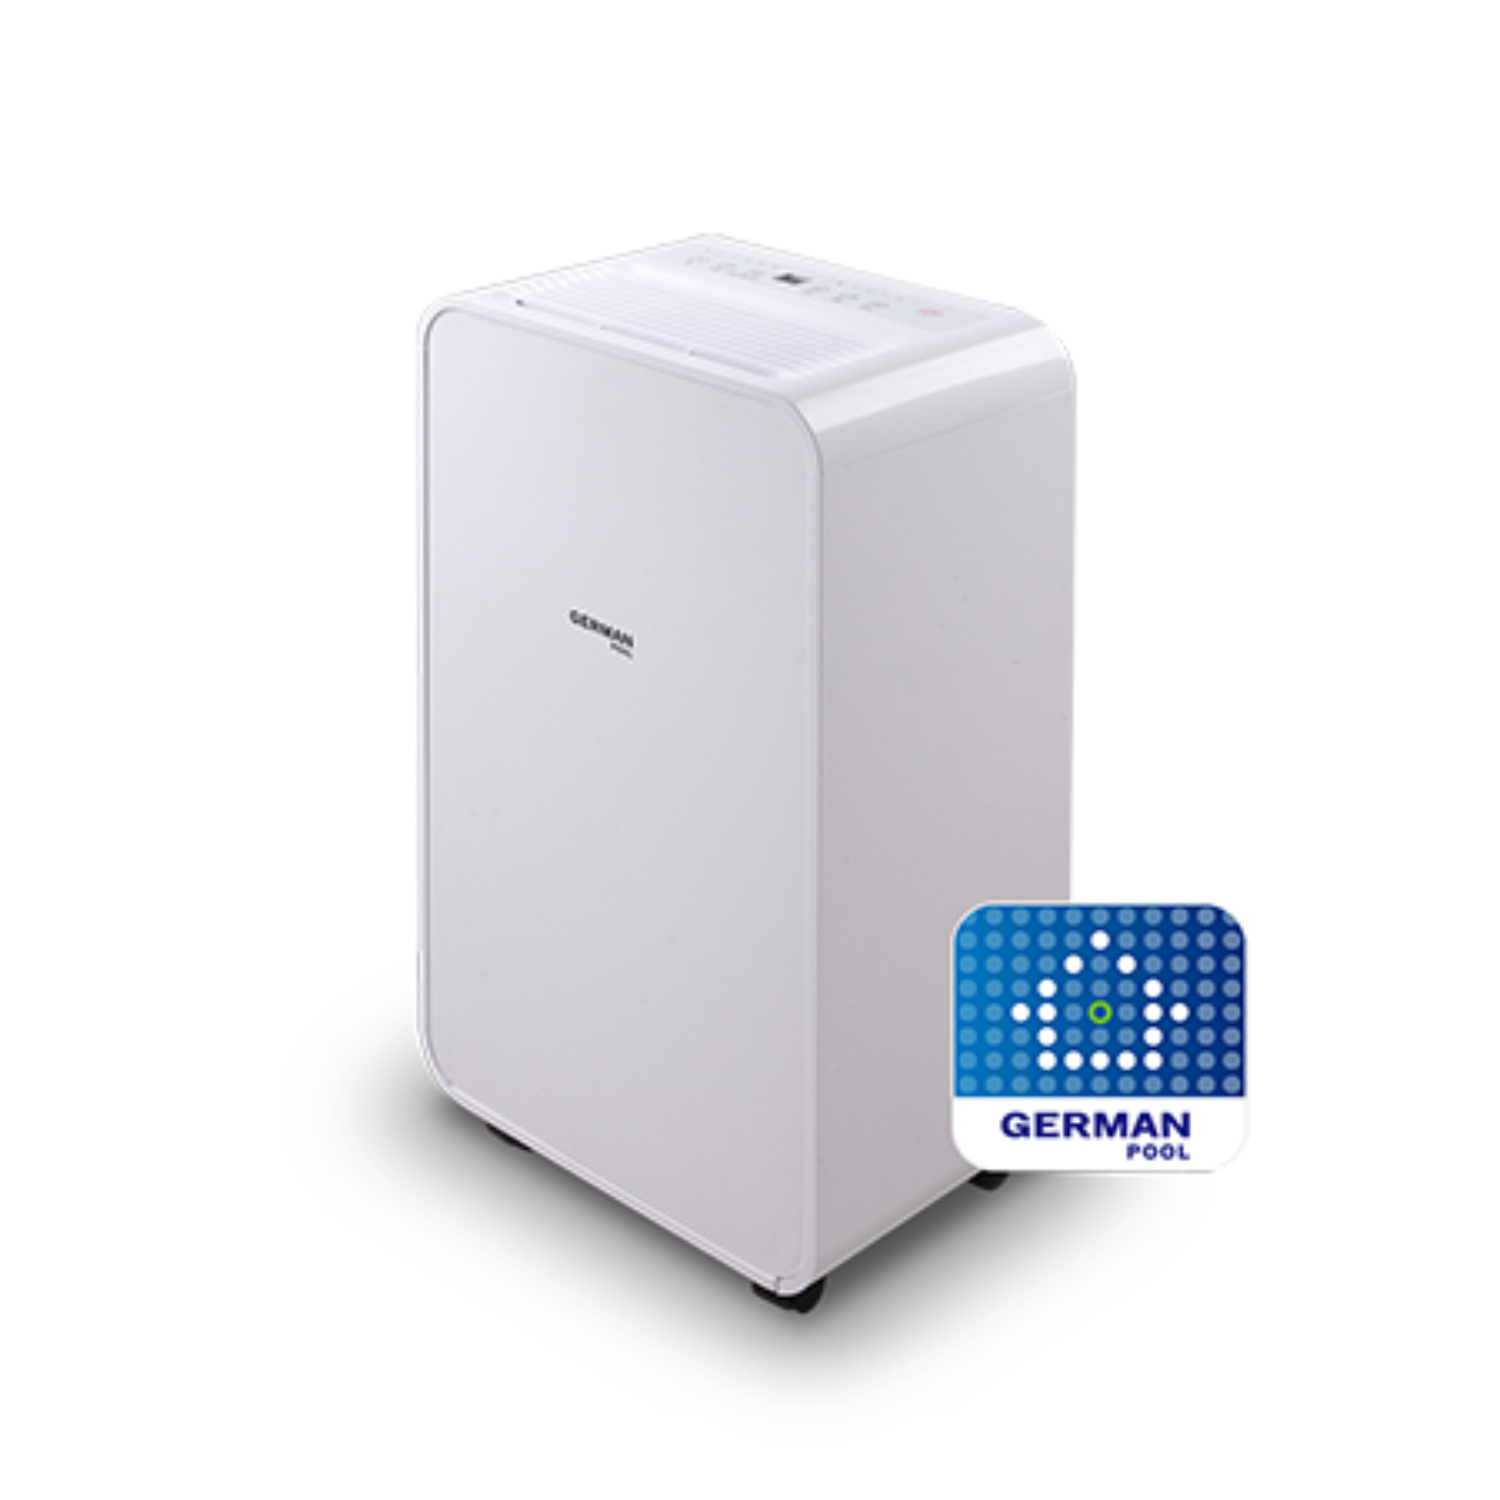 German pool WiFi Smart Air Purifying Dehumidifier (DHM-807-SC-WT), , large image number 0